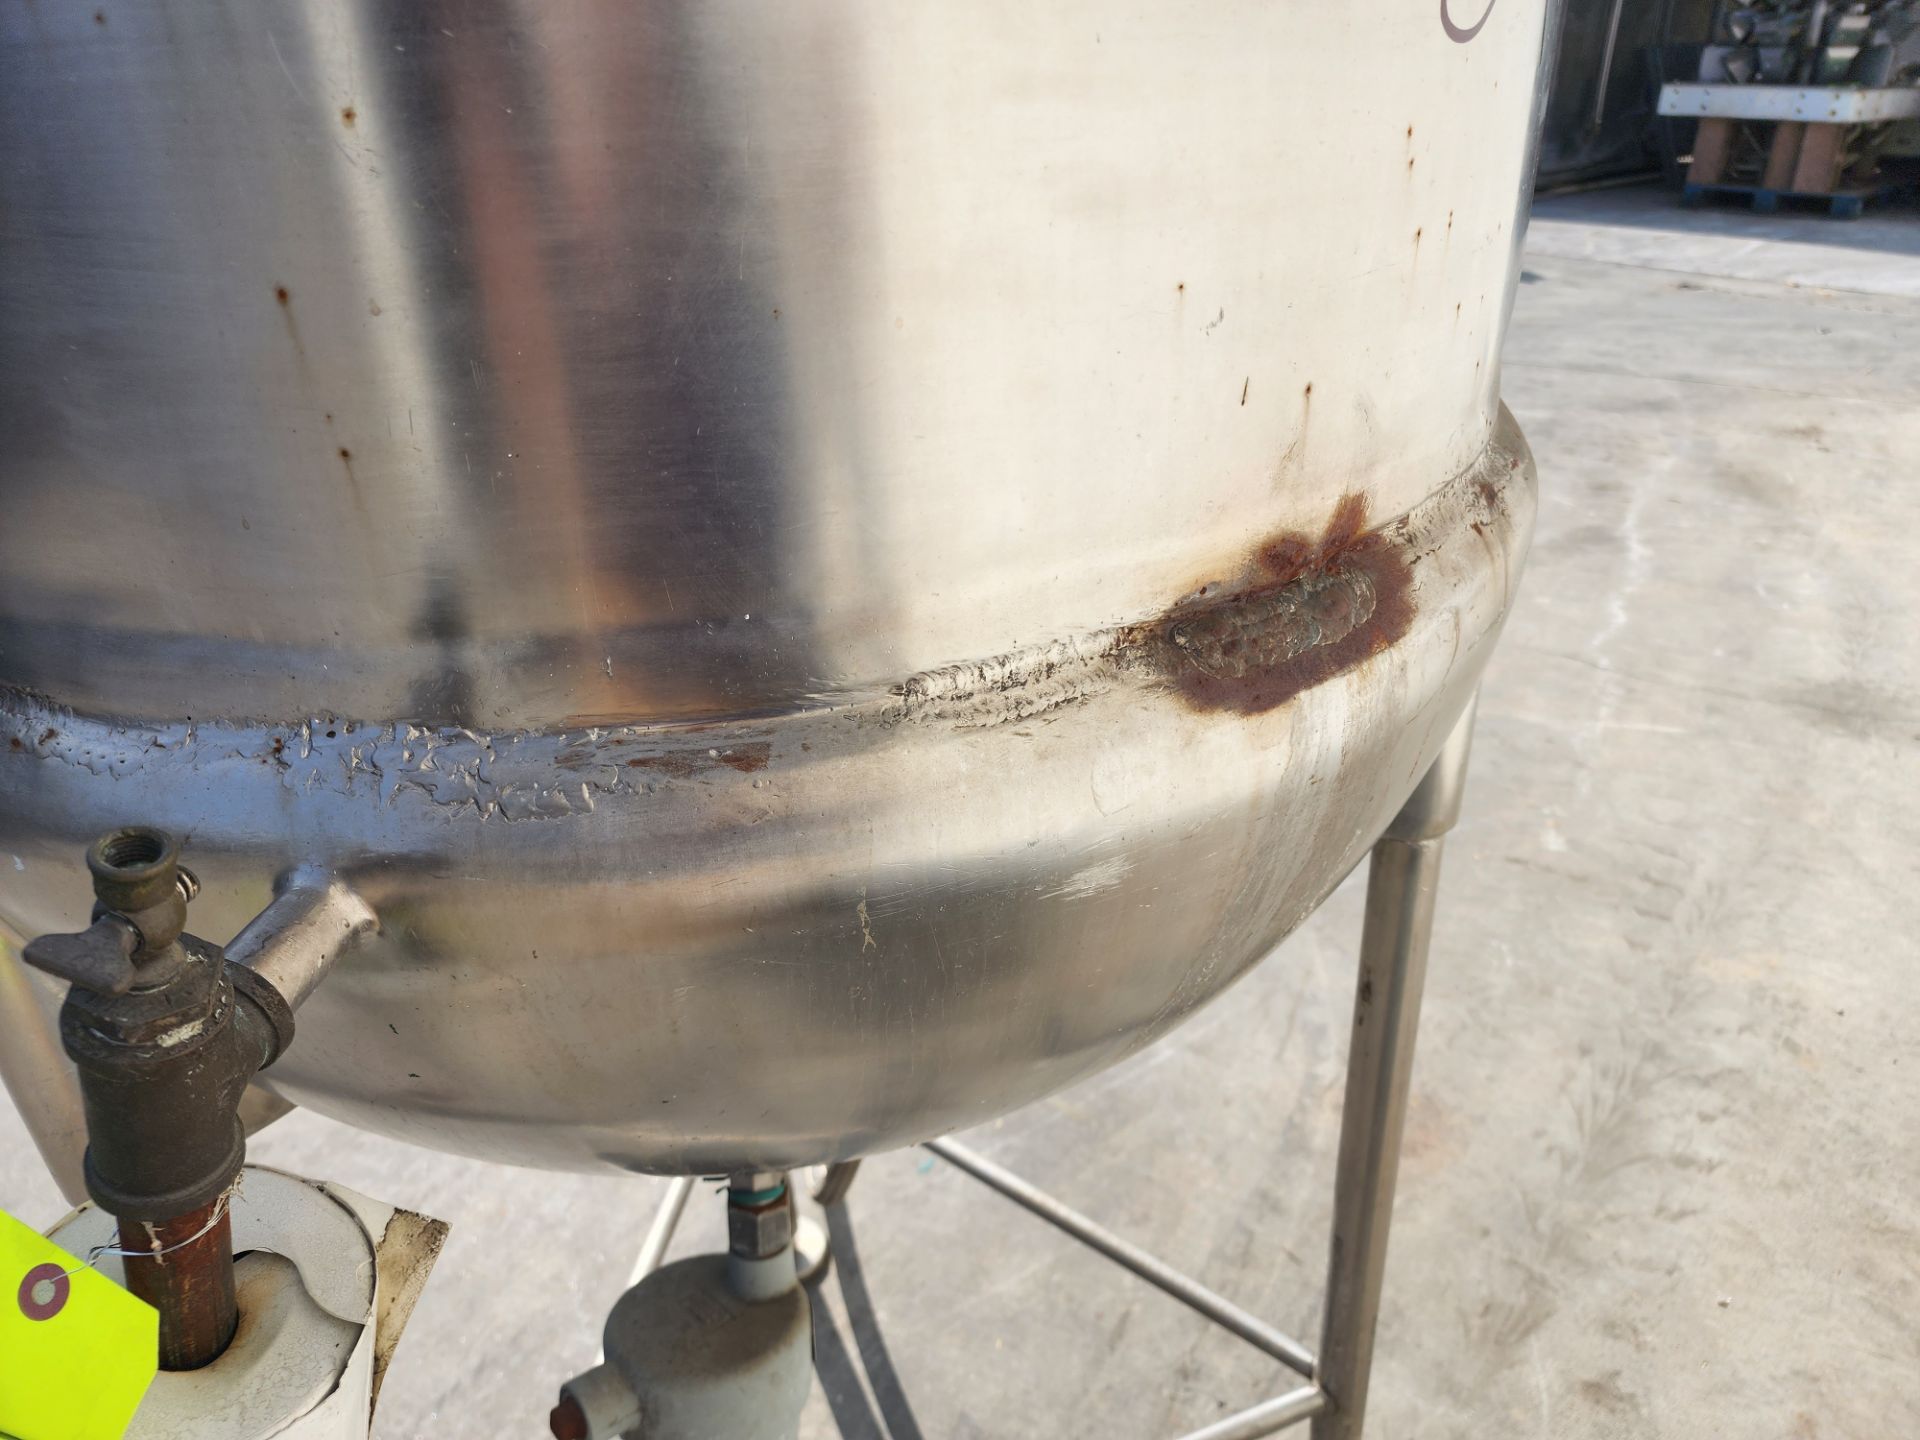 Lee Steam Fired Jacketed Kettle, Model 75D, SN 417 U, 75 Gallon Capacity. - Image 8 of 8